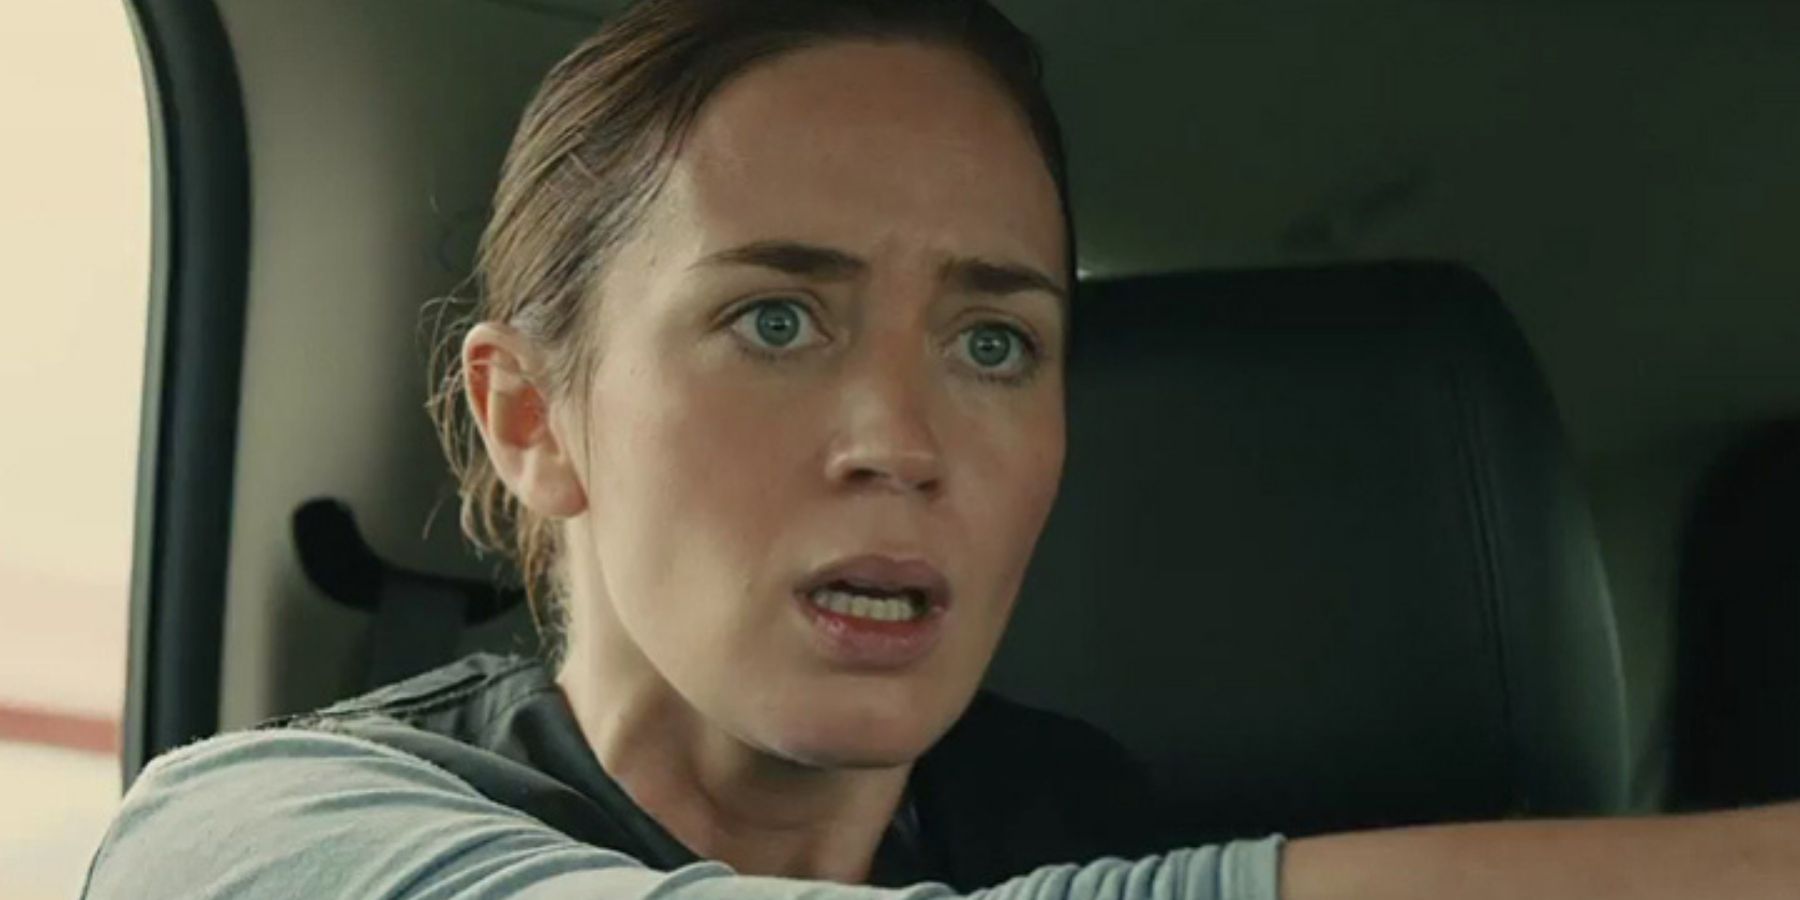 A shocked Kate Mercer looks at something from inside a car